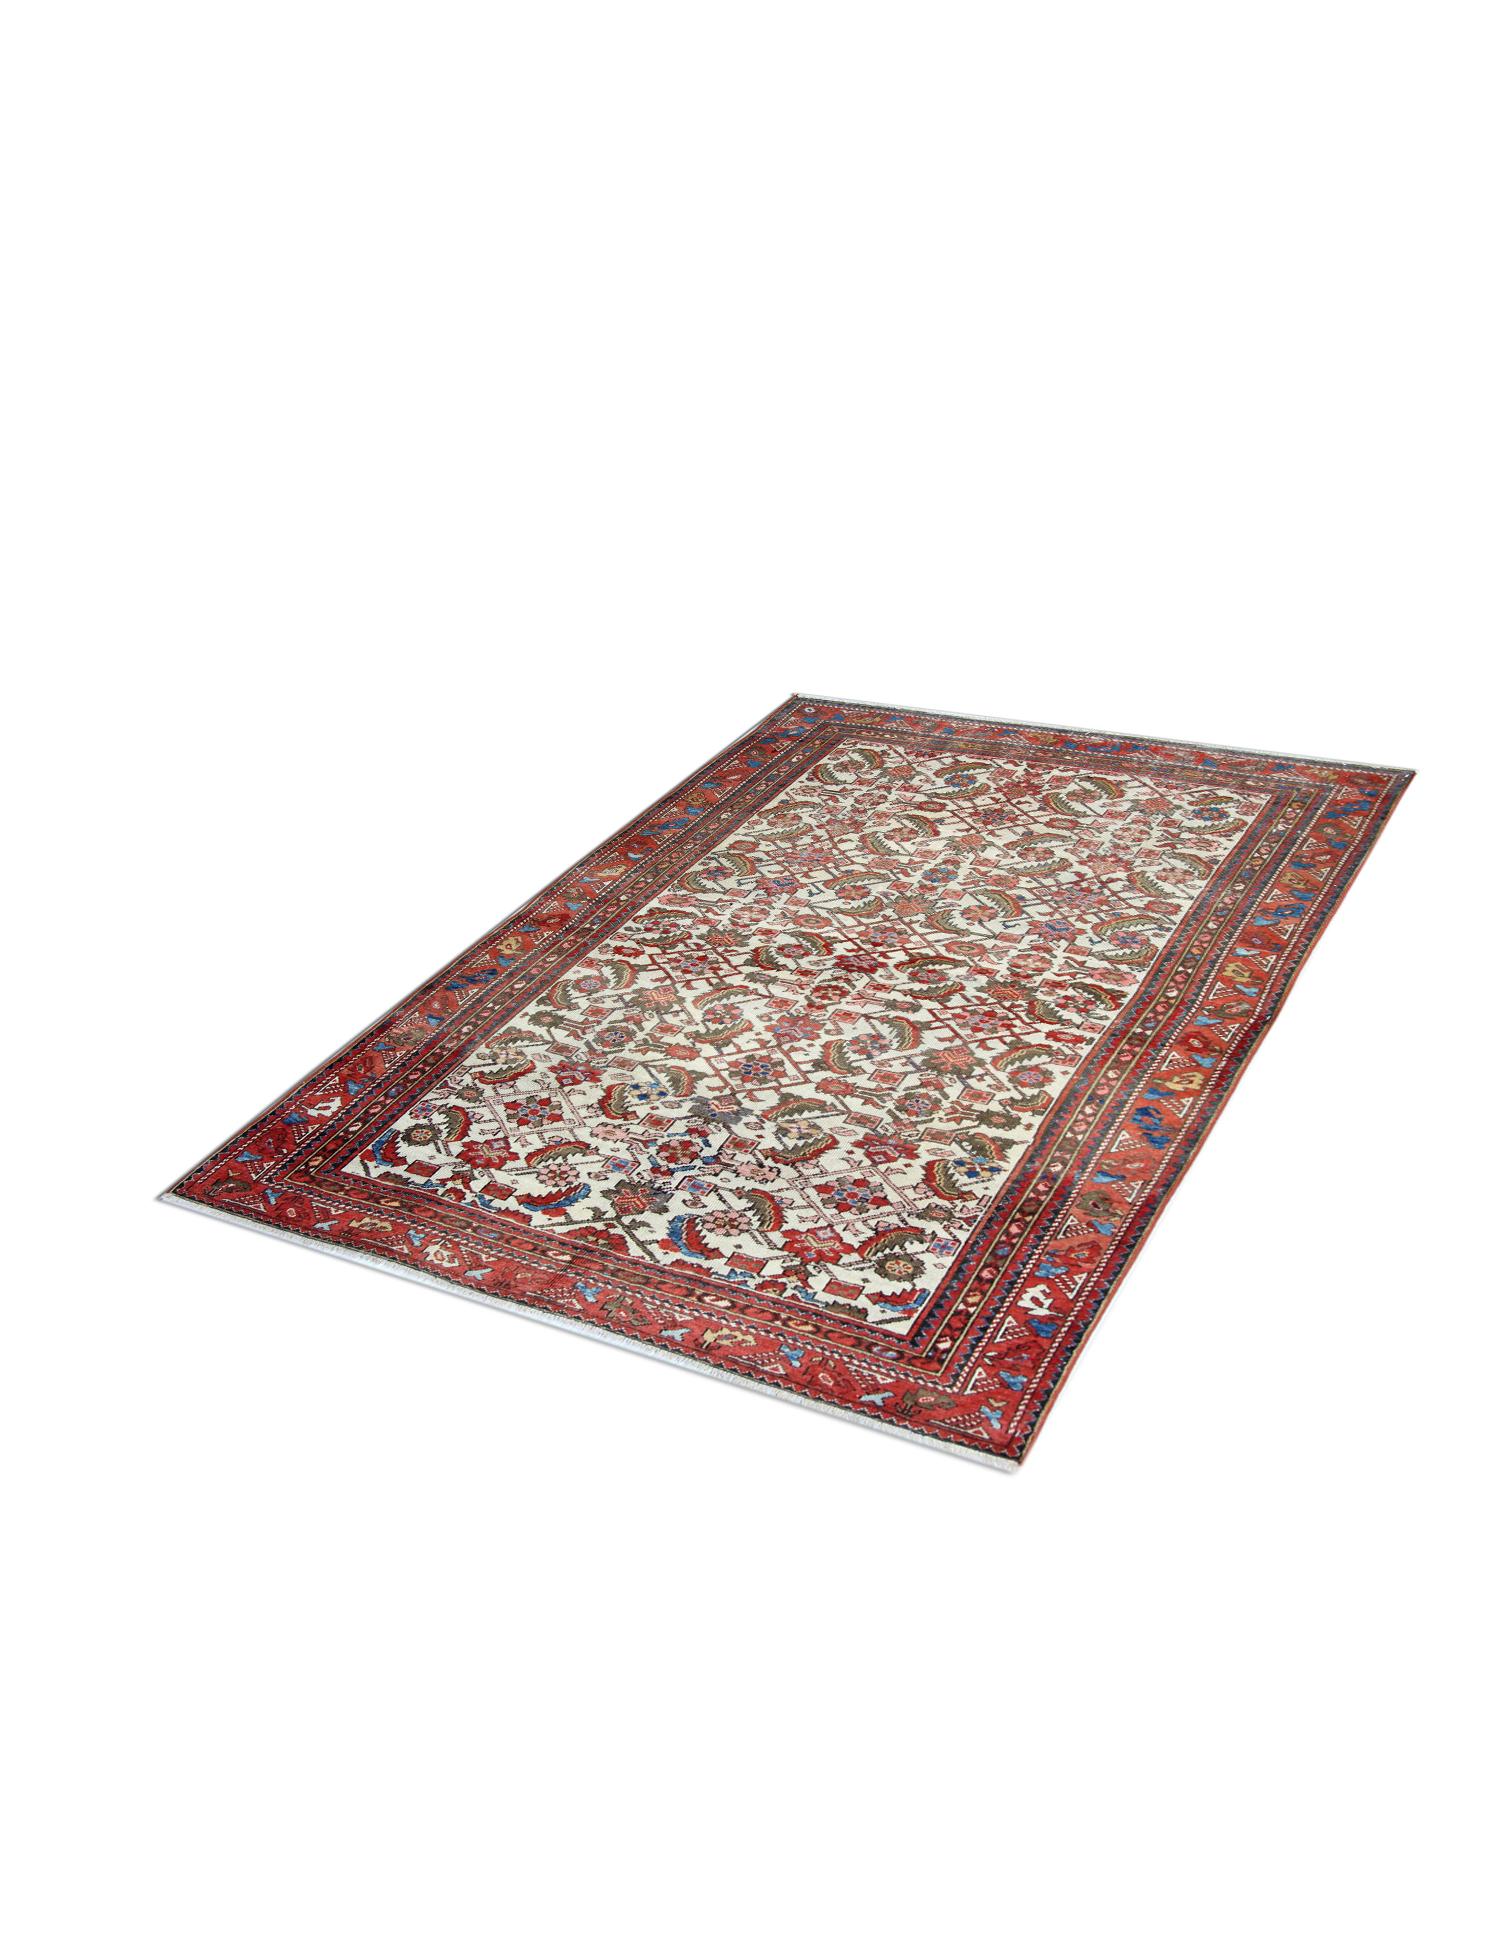 Country Antique Geometric Rug Handwoven Oriental Cream Bedroom Rug For Sale